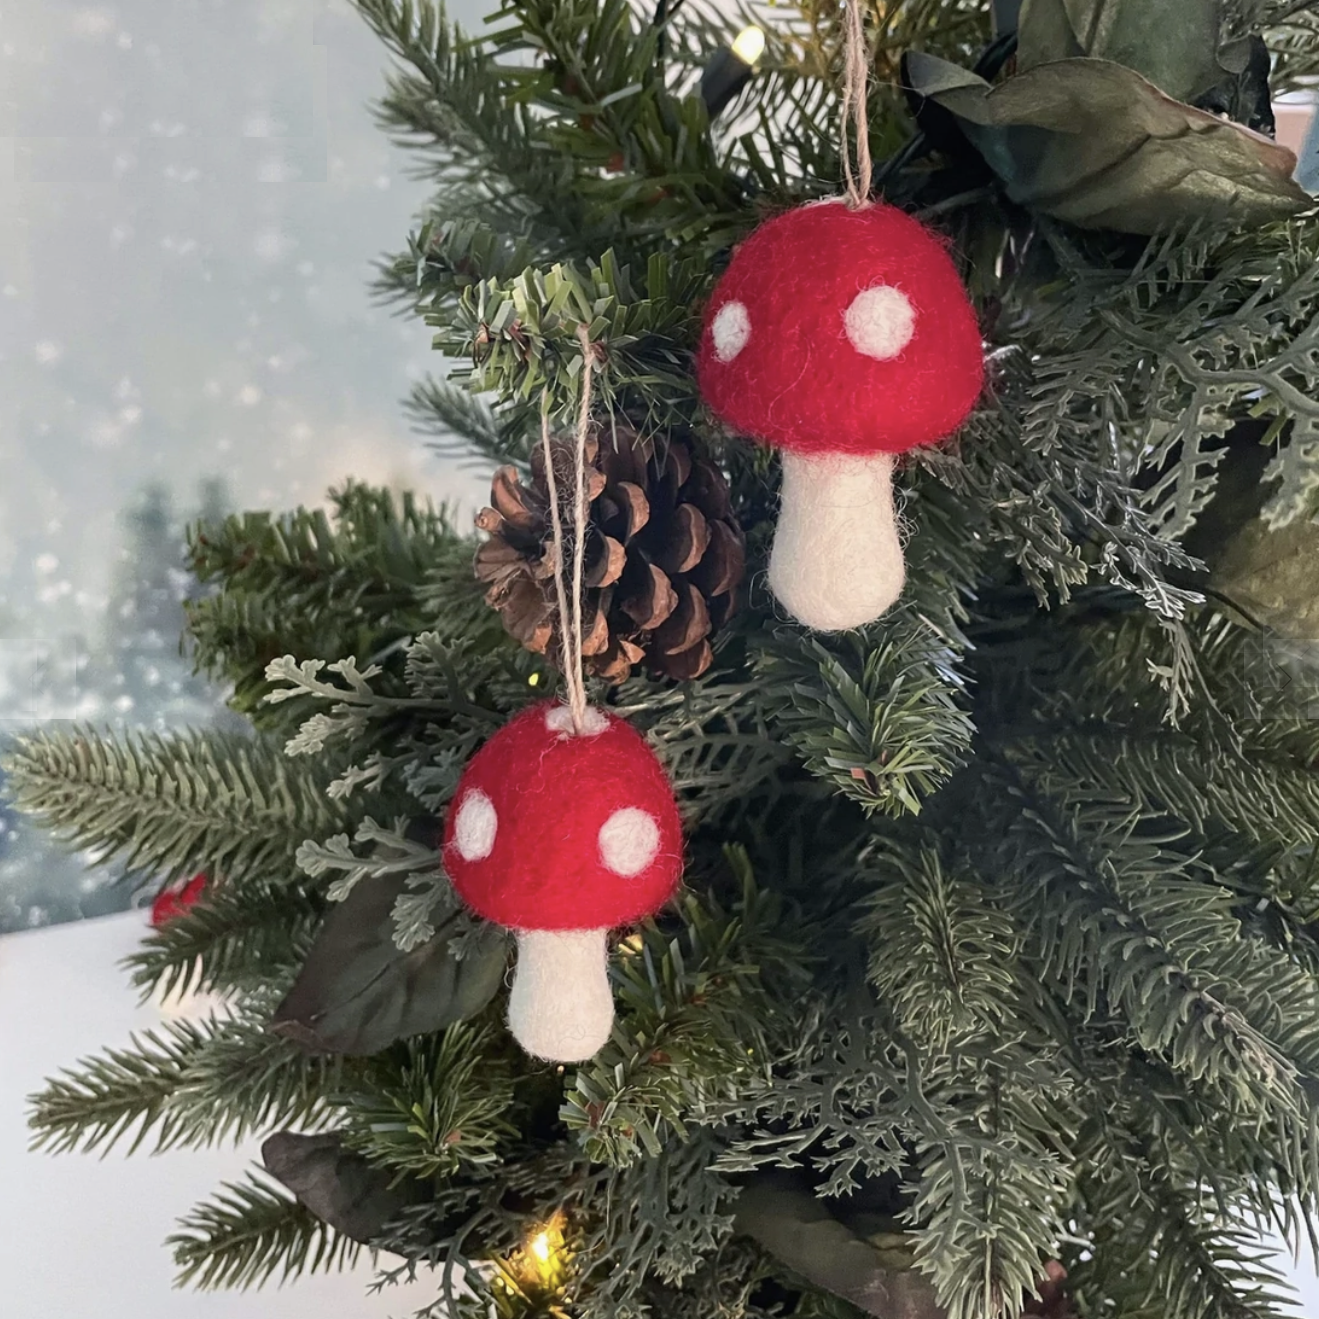 Wool ornaments, Red & White toadstool mushrooms, set of 3 - New Zealand Wool